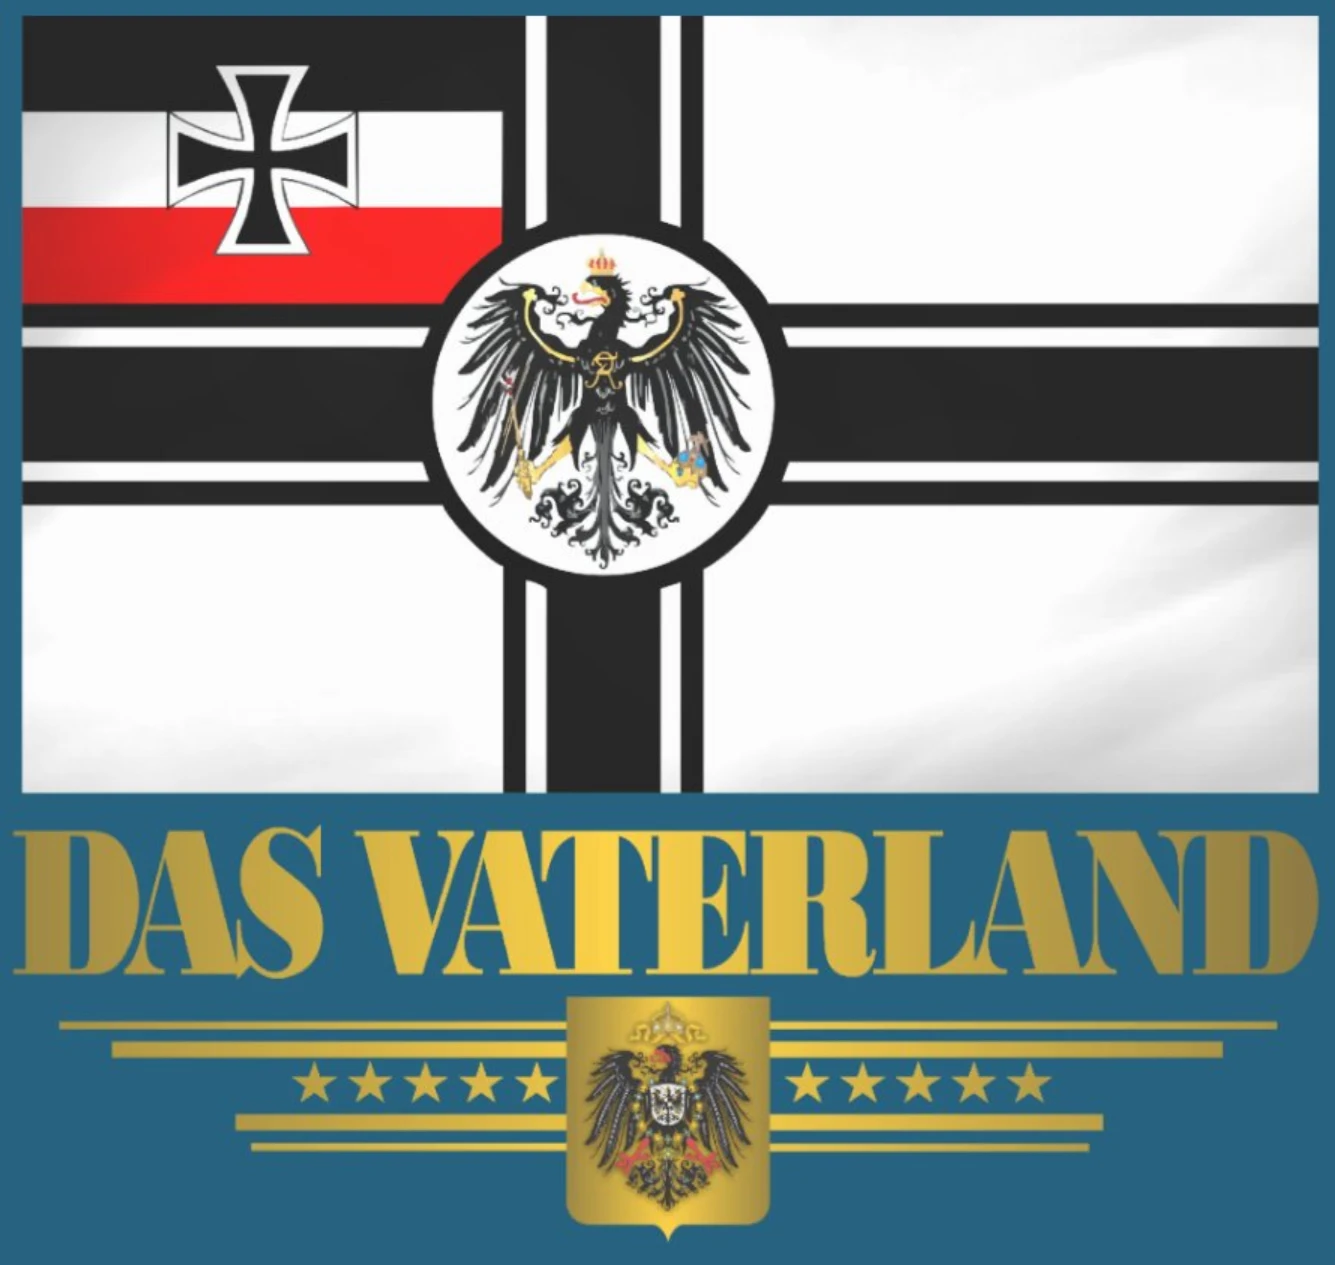 

Das Vaterland. Prussia Eagle German Imperial Flag Printed T-Shirt. Summer Cotton Short Sleeve O-Neck Unisex T Shirt New S-3XL